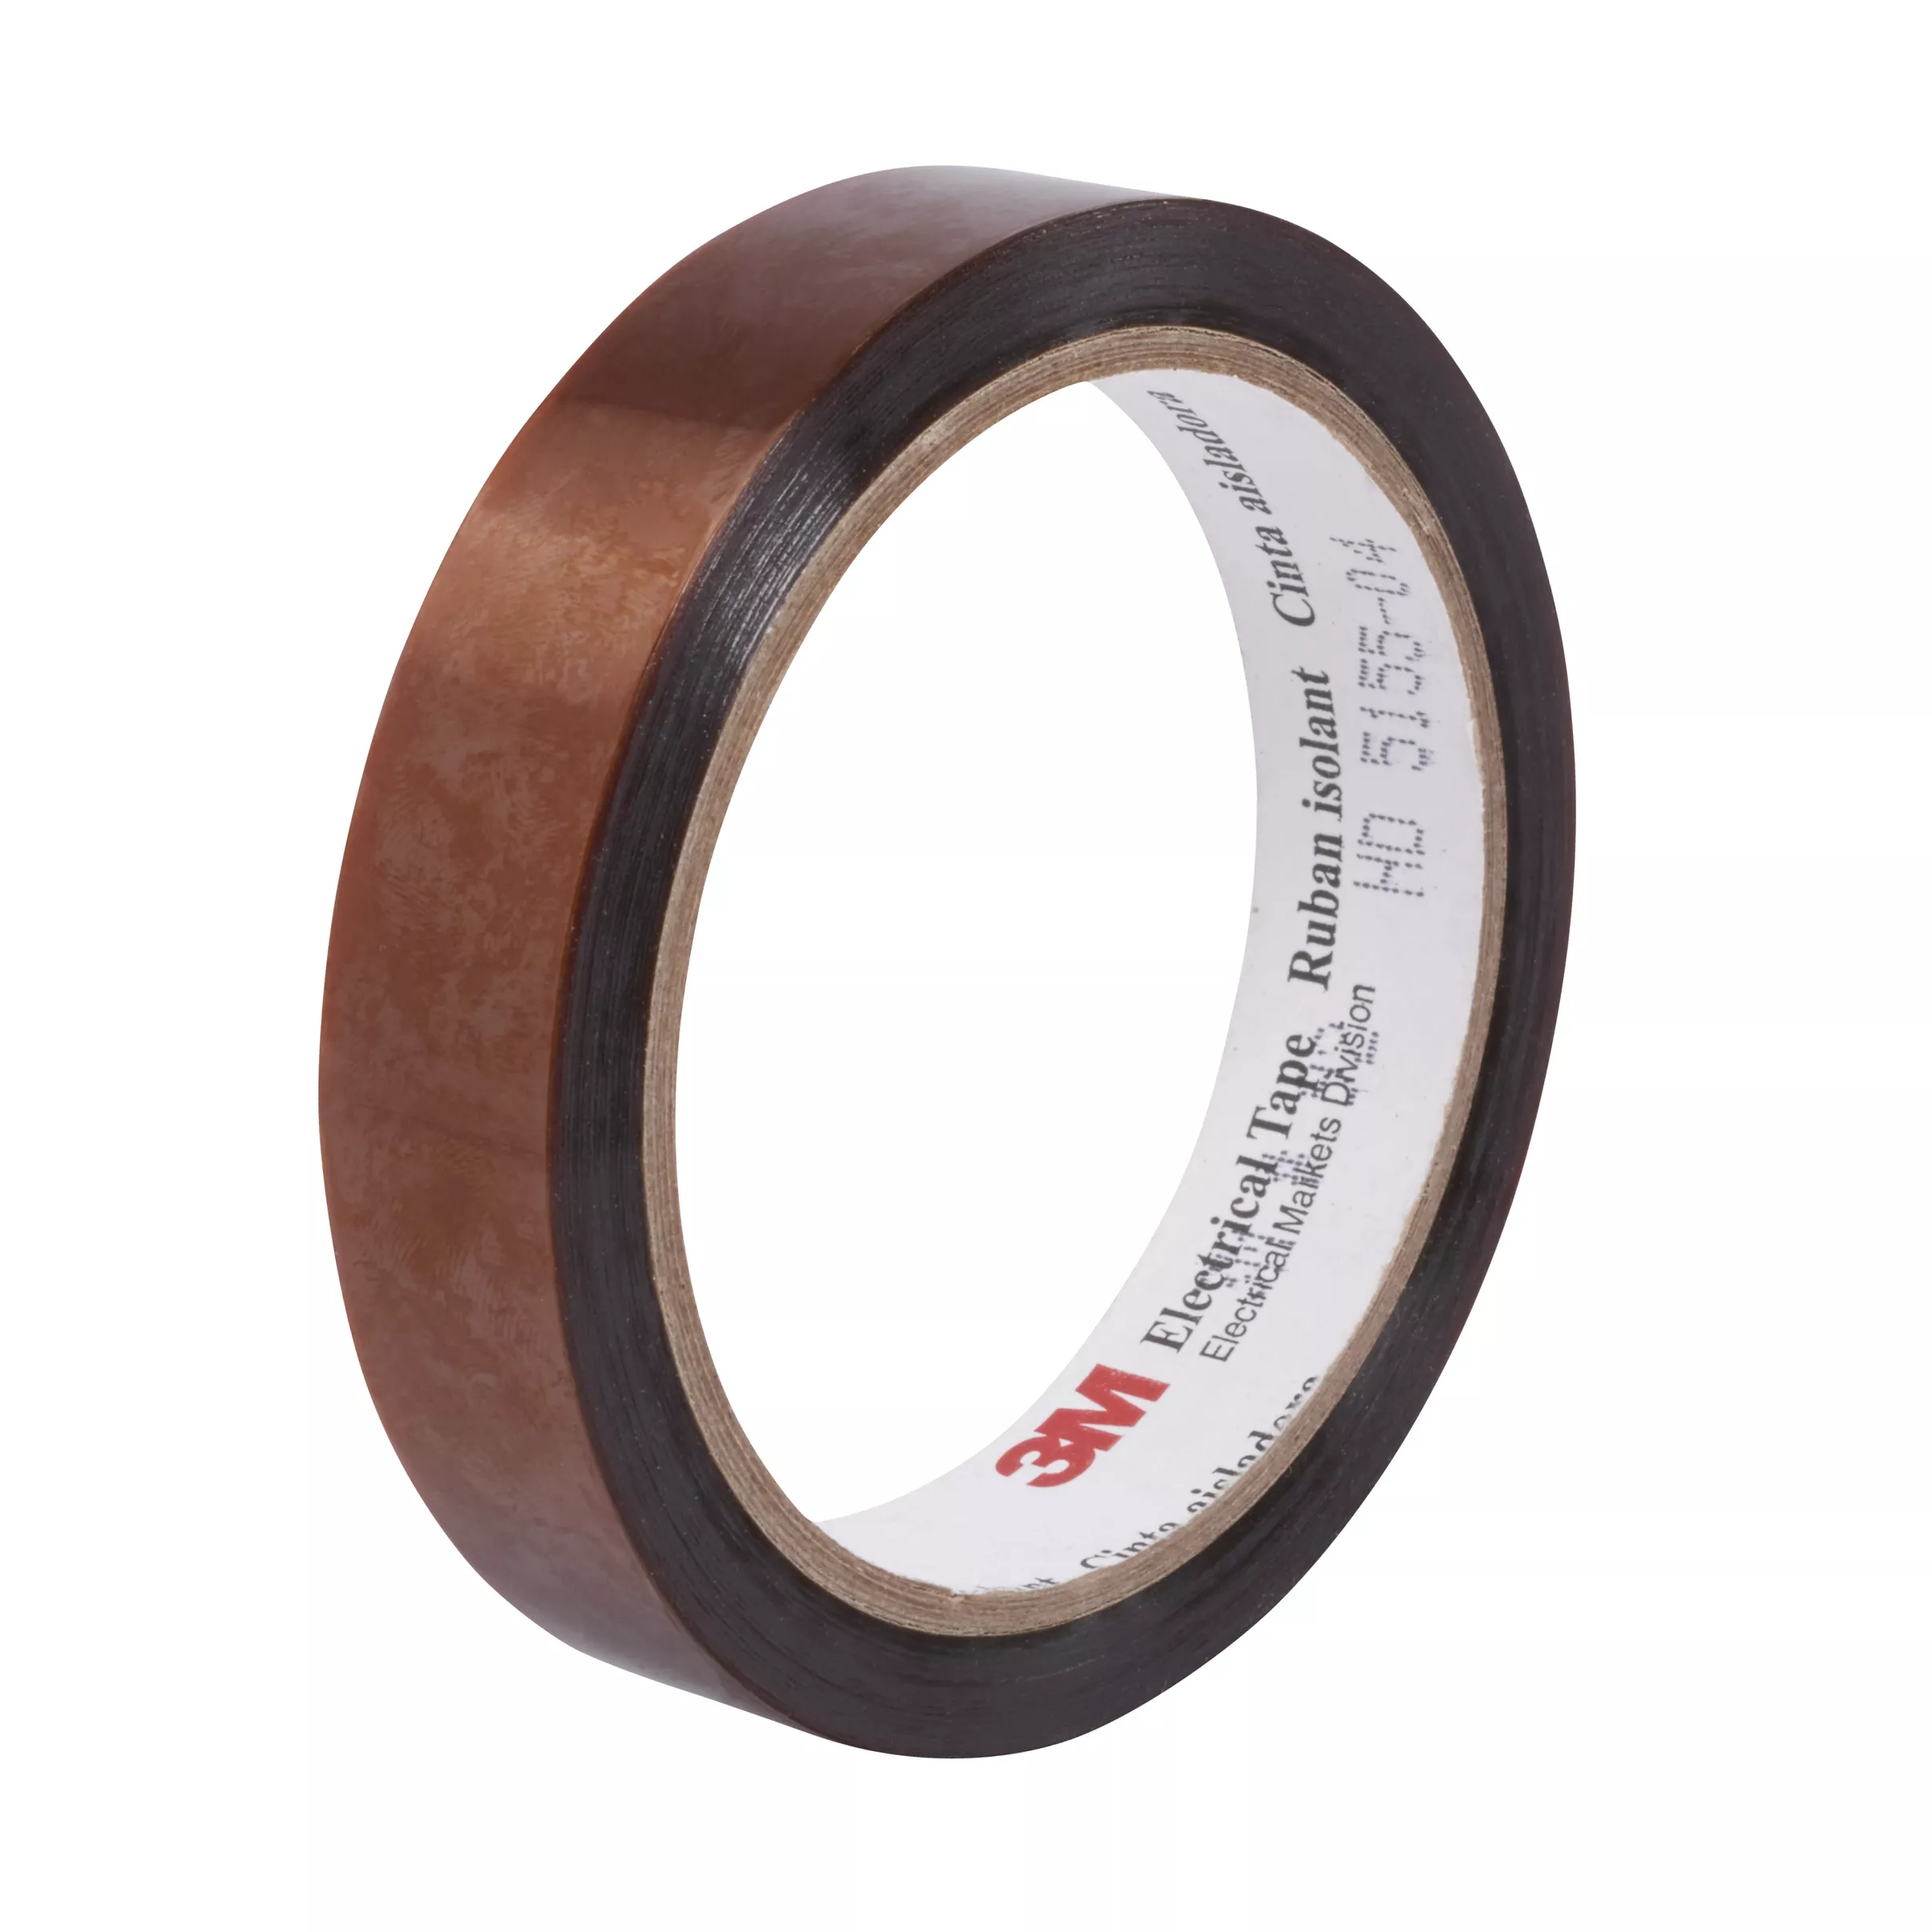 SKU 7000006155 | 3M™ Polyimide Film Electrical Tape 92